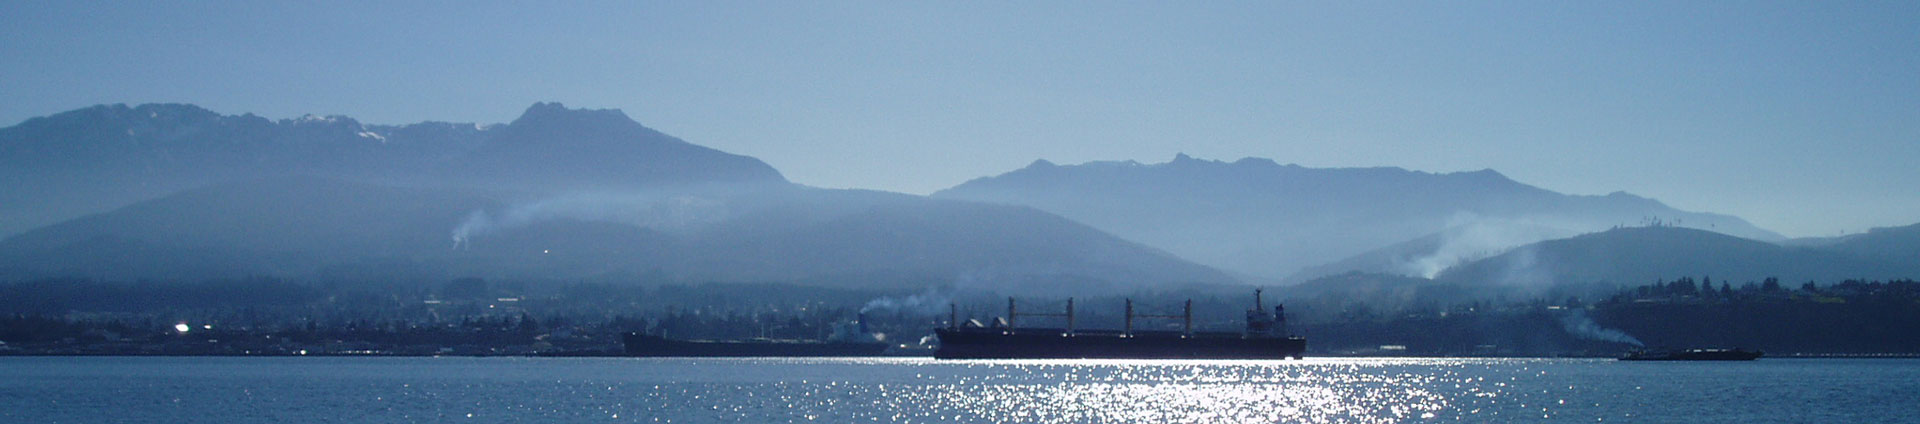 header image of port angeles mountains and sound